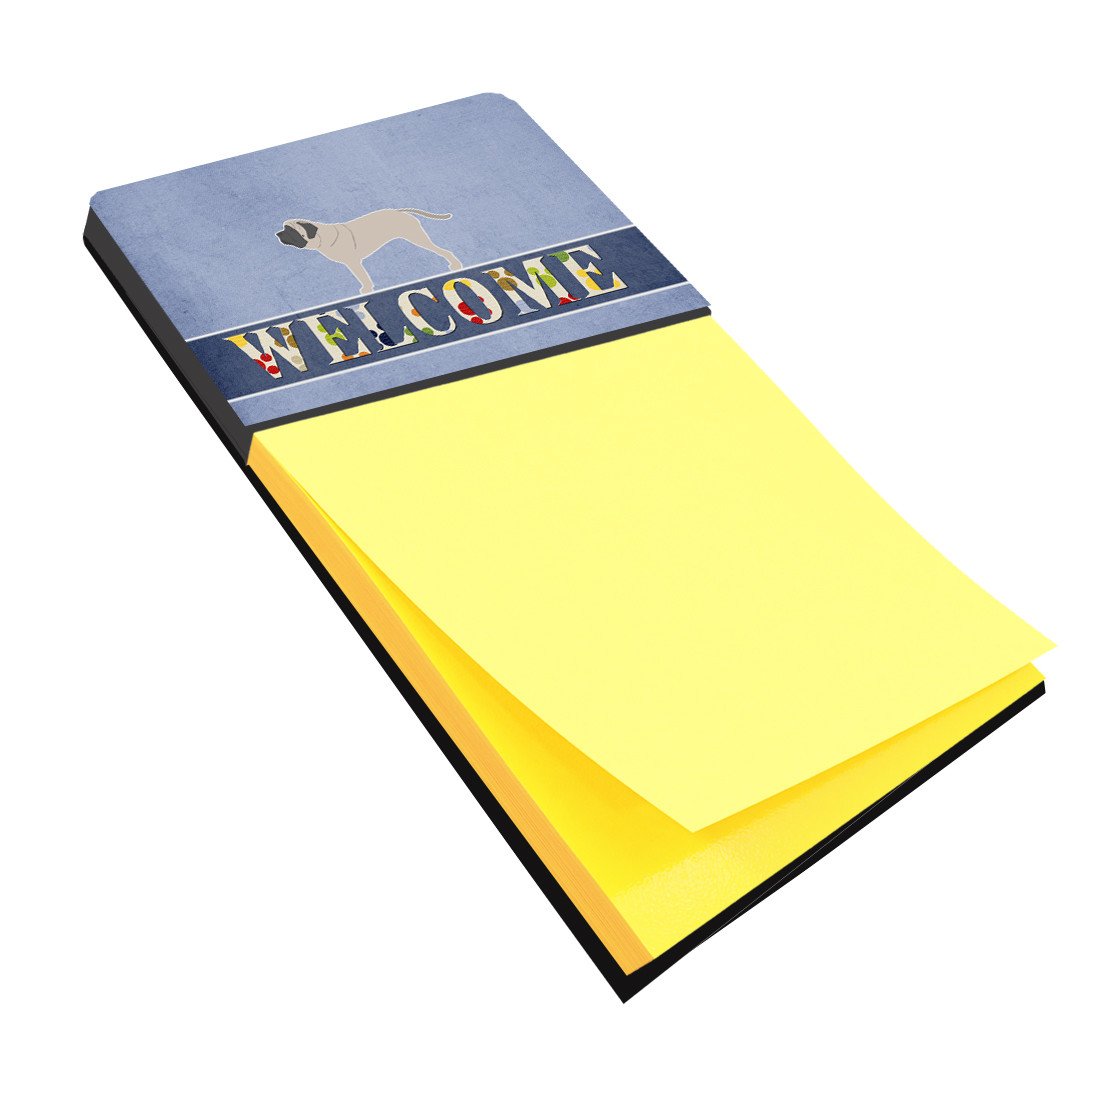 English Mastiff Welcome Sticky Note Holder BB5560SN by Caroline's Treasures